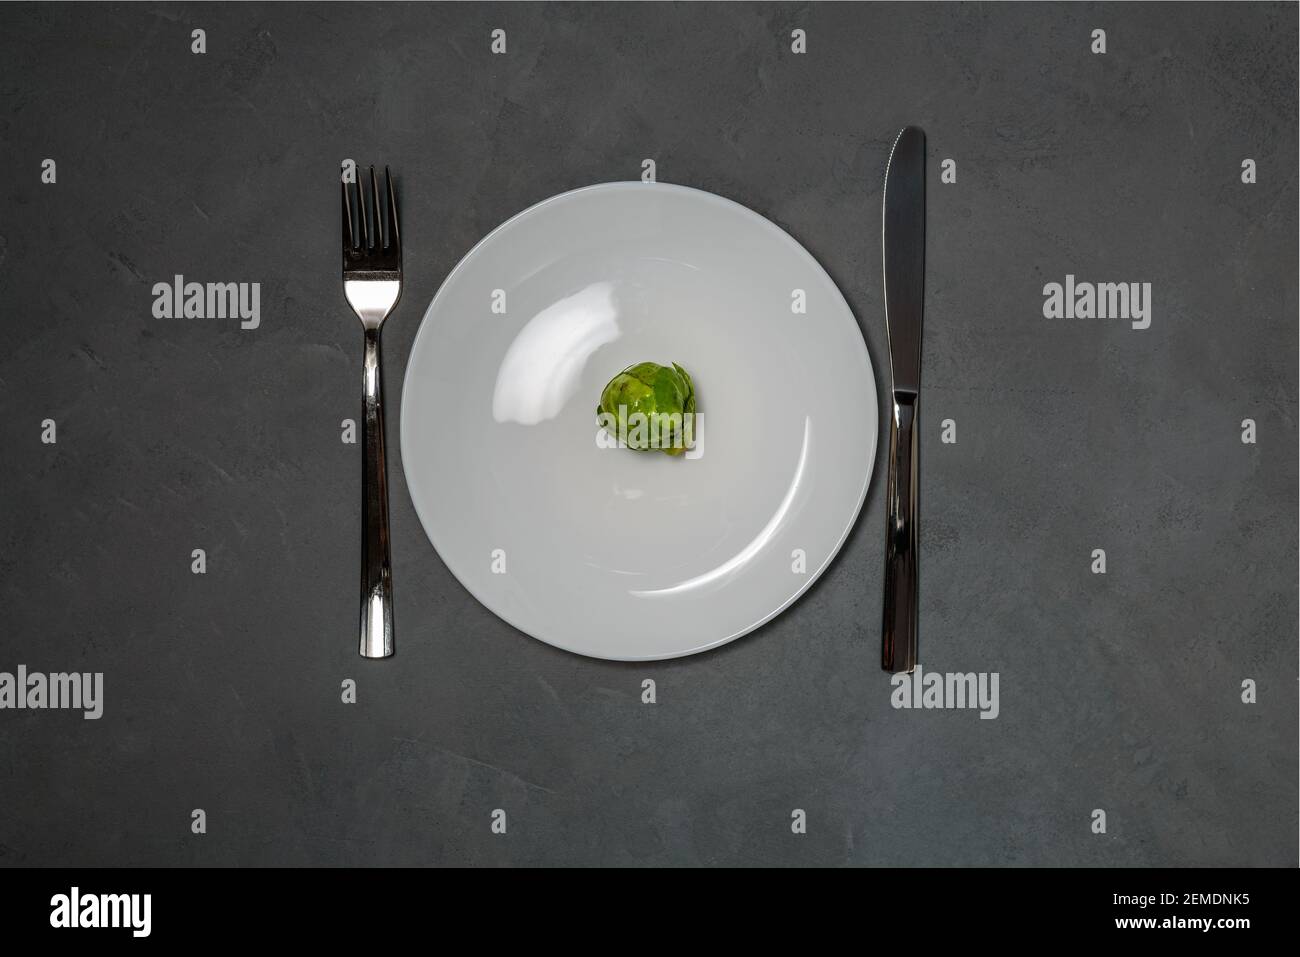 Plate with Brussels sprout, fork and knife. Dieting concept, weight loss Stock Photo